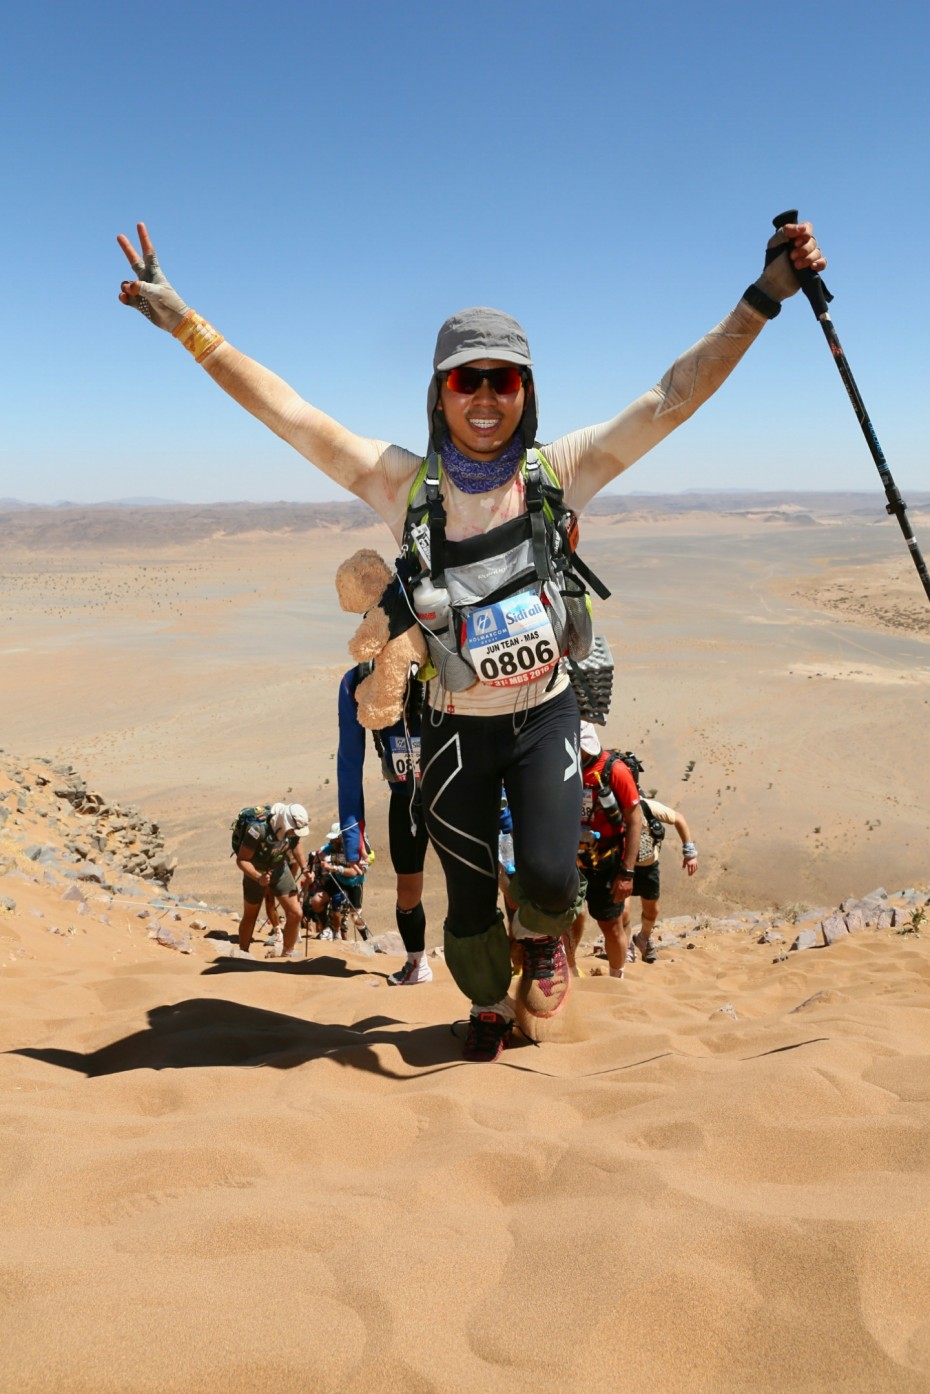 Red Ribbon youth icon Jeff Lau was in the Sahara Desert for the Marathon Des Sables – dubbed the world’s toughest foot race – to raise funds for the Malaysian AIDS Foundation. — Handout